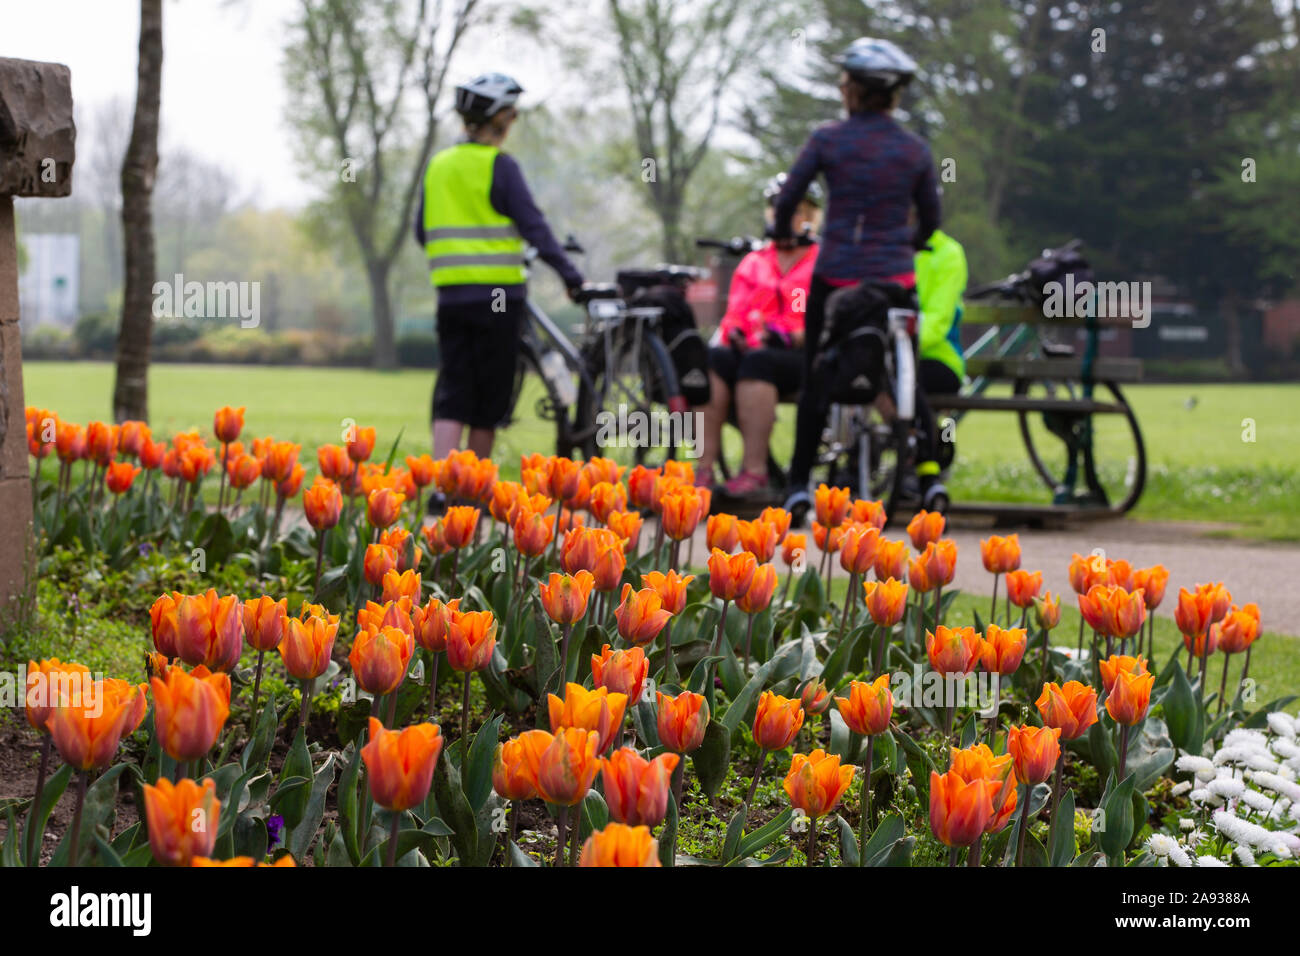 Cyclists taking a break with Tulip bed in foreground in Vivary Park, Taunton, England, UK Stock Photo